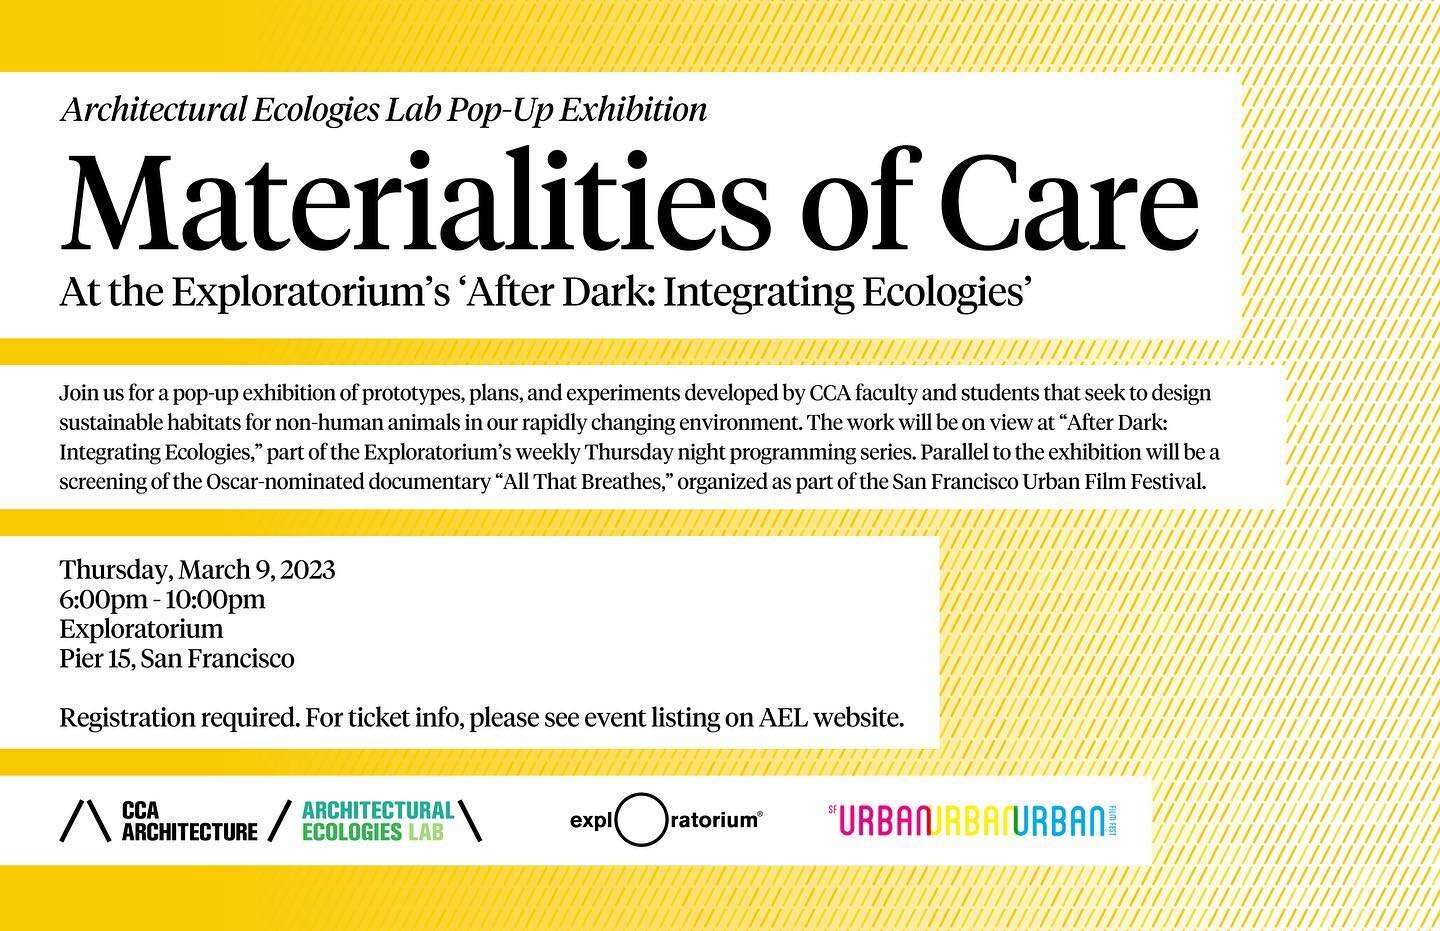 This coming Thursday, evening March 9, the Architectural Ecologies Lab will be on site at the @exploratorium for a pop-up exhibition &ldquo;Materialities of Care,&rdquo; showcasing faculty and student research into ecological habitats for more-than-h